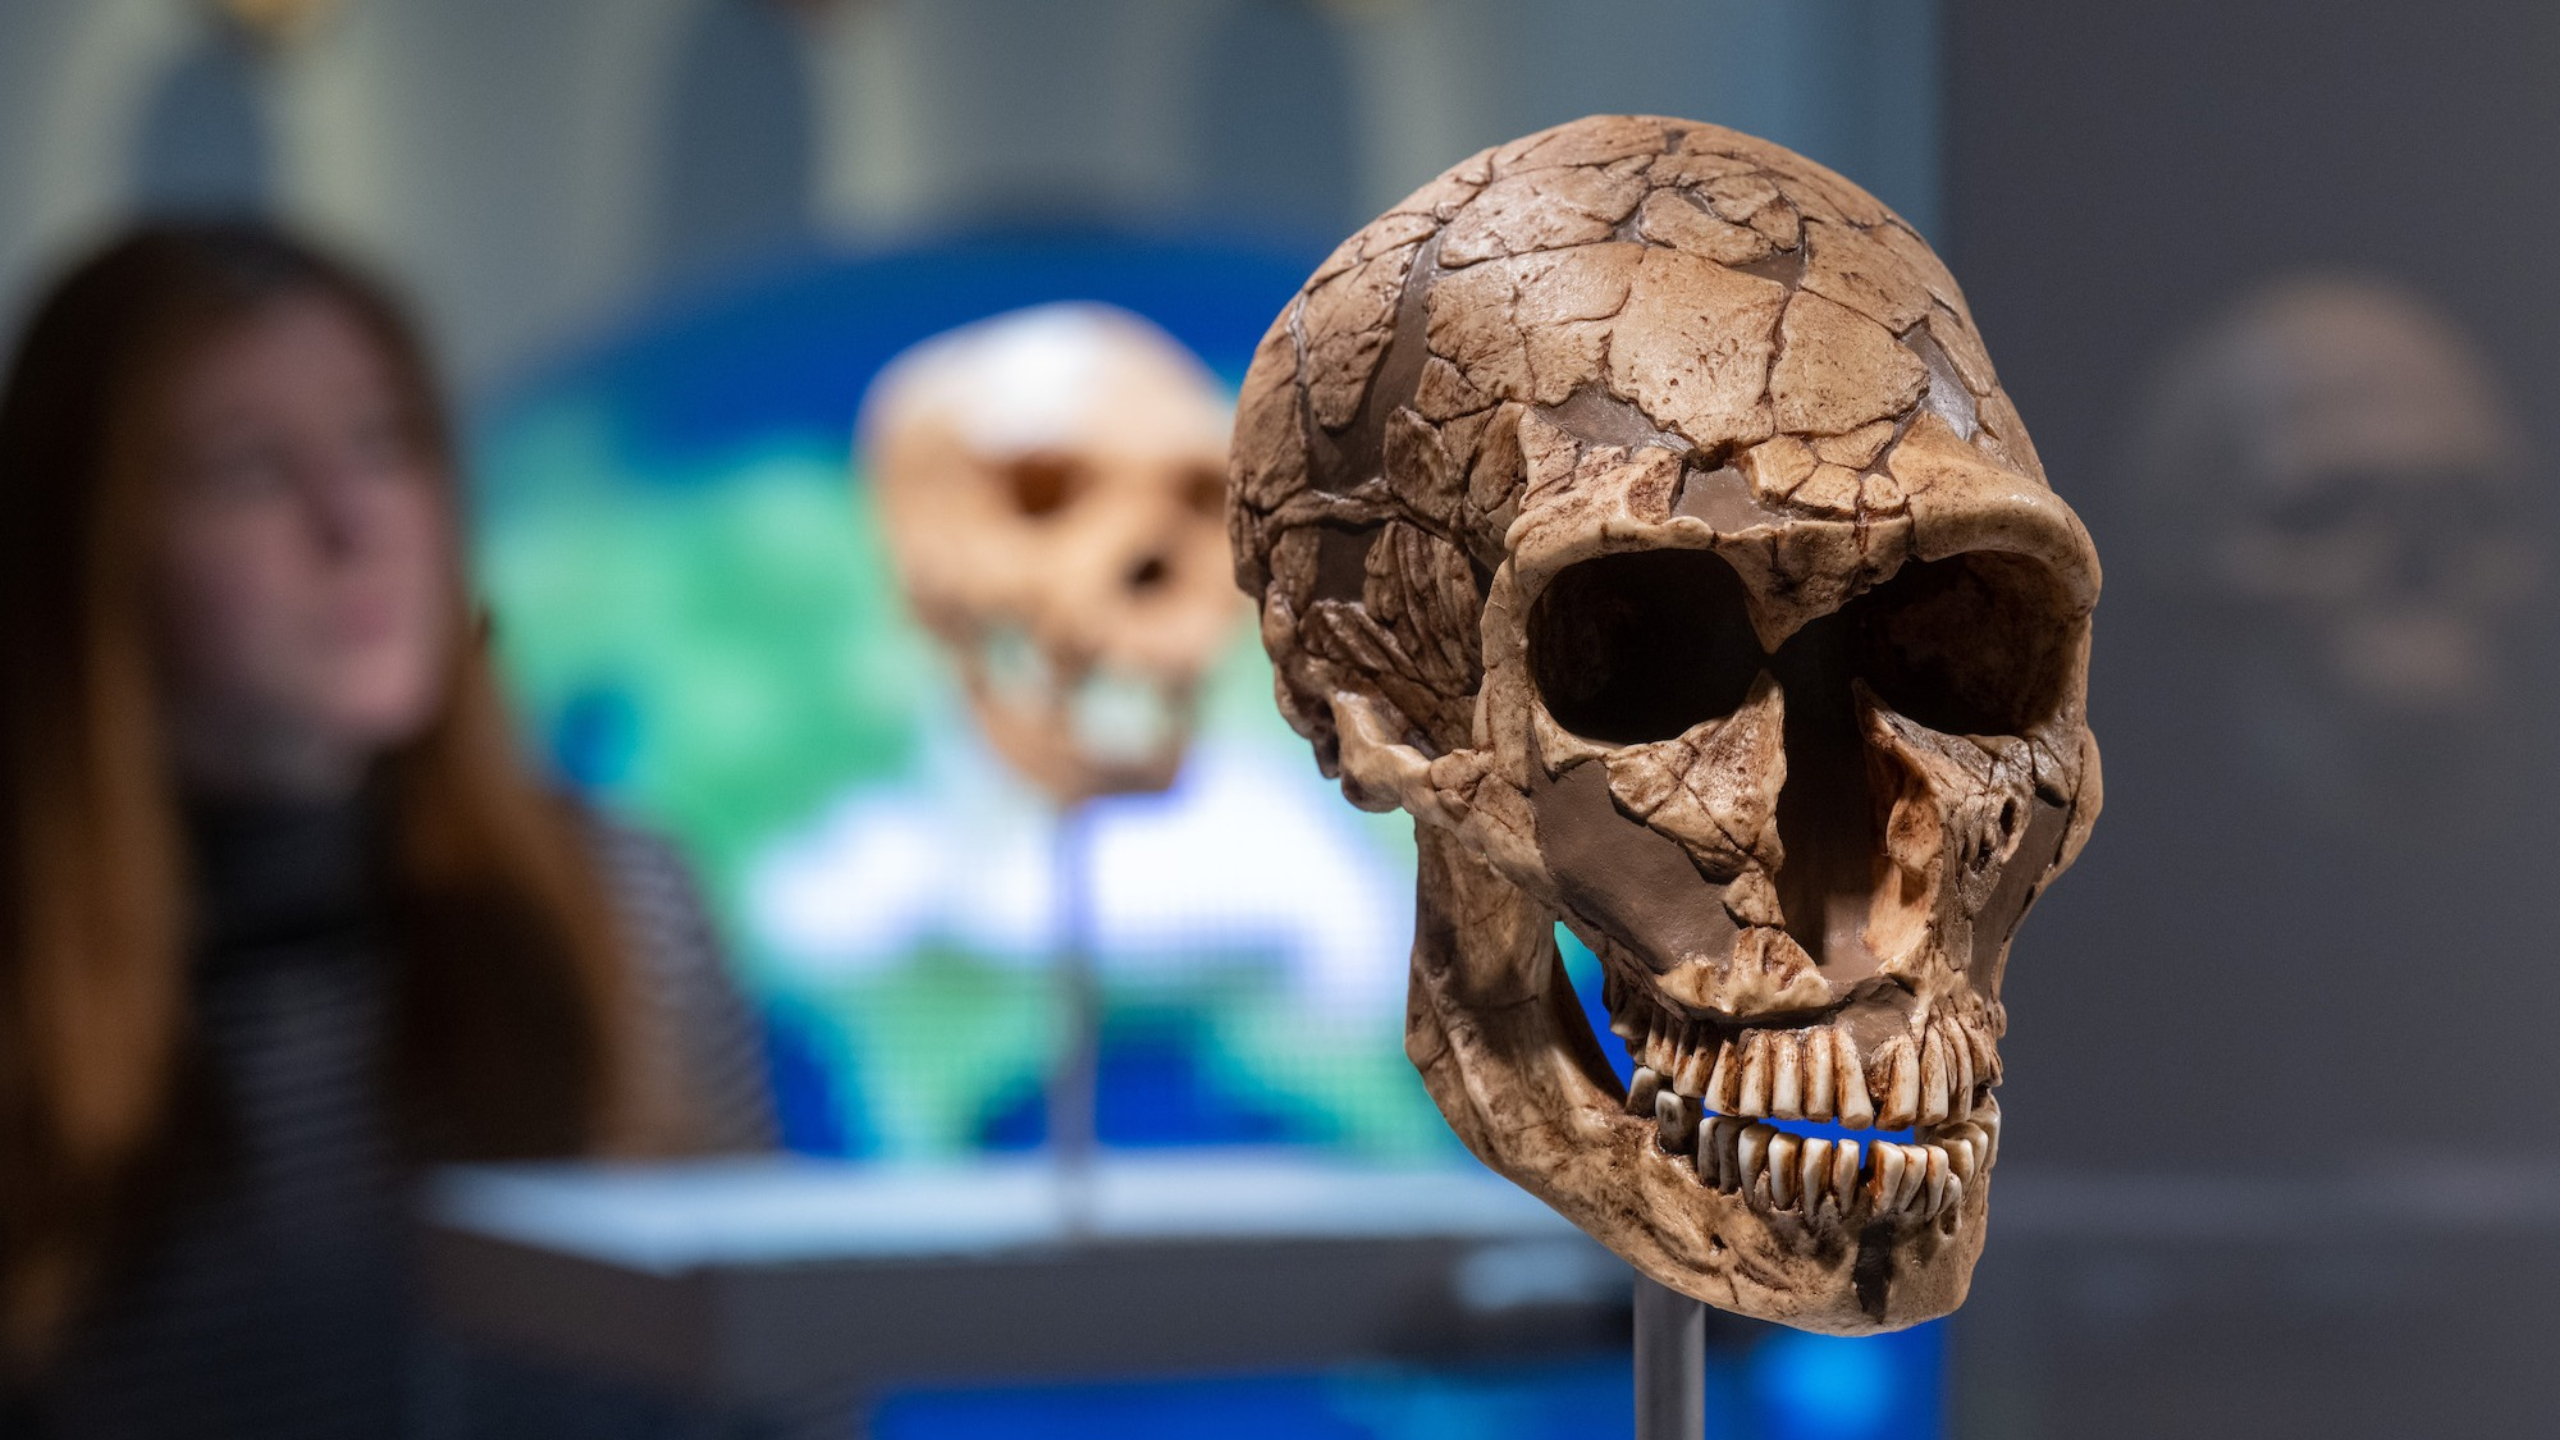 The cast of a Neanderthal skull on display at the Chemnitz State Museum of Archaeology in Germany on January 24, 2023.